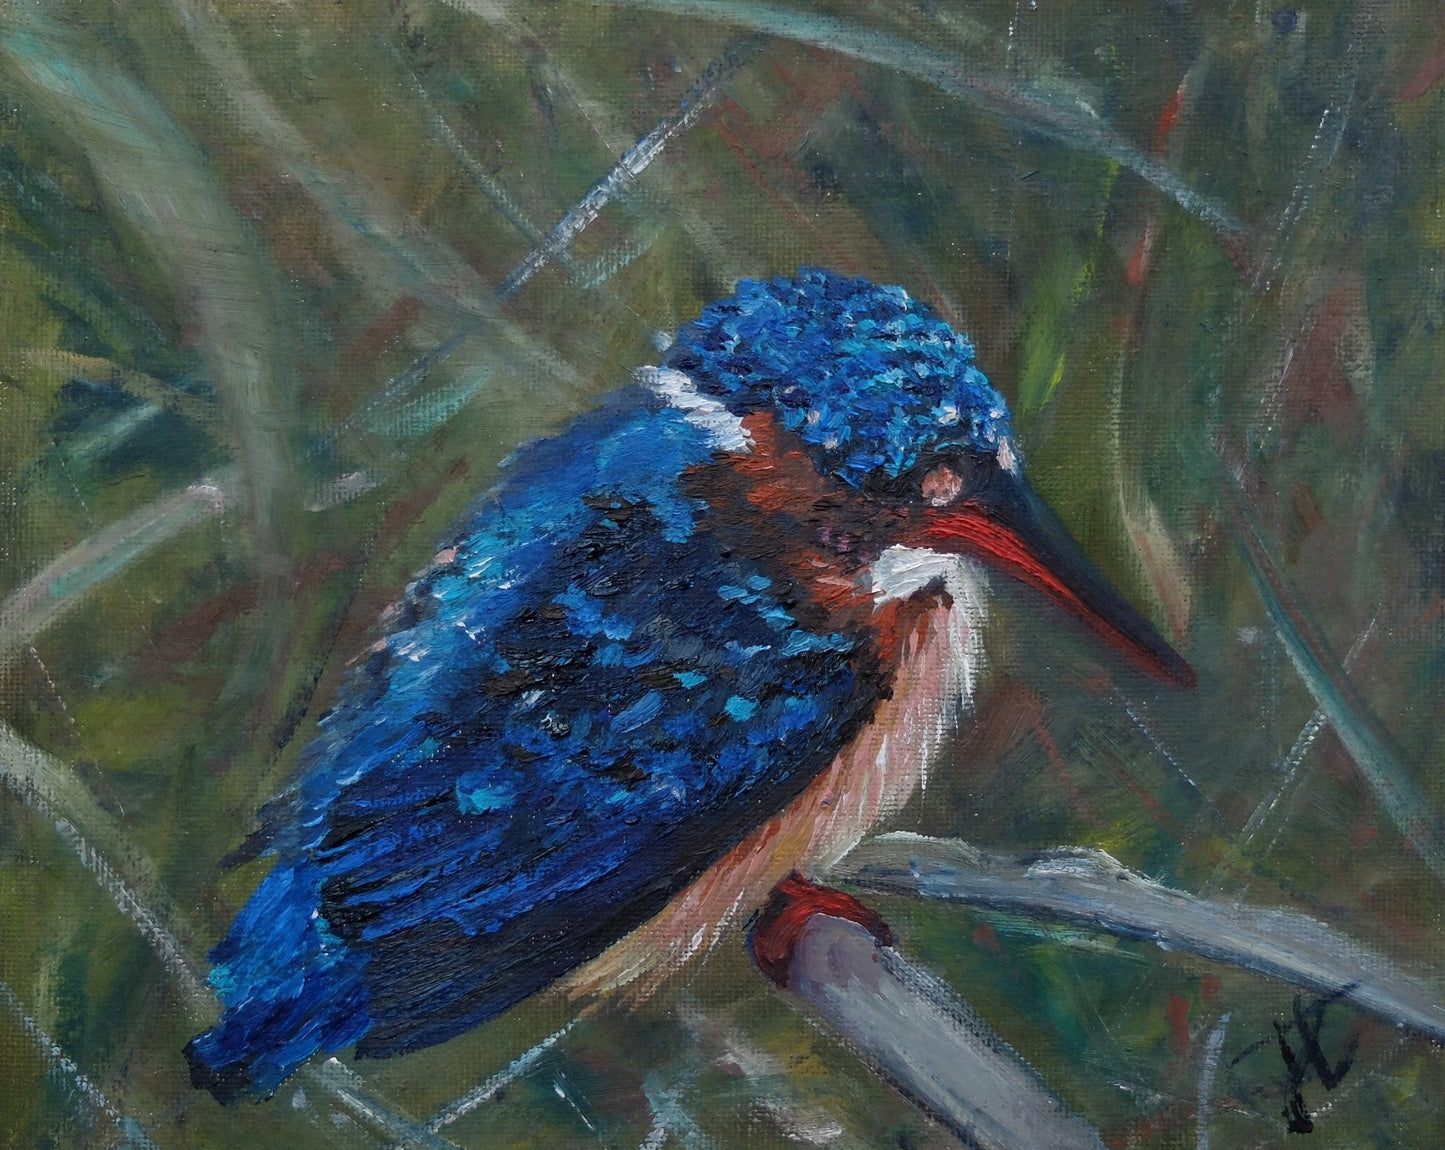 Photograph of painting cropped to edge: a malachite kingfisher on a dry reed surrounded by lots of leafy reeds.